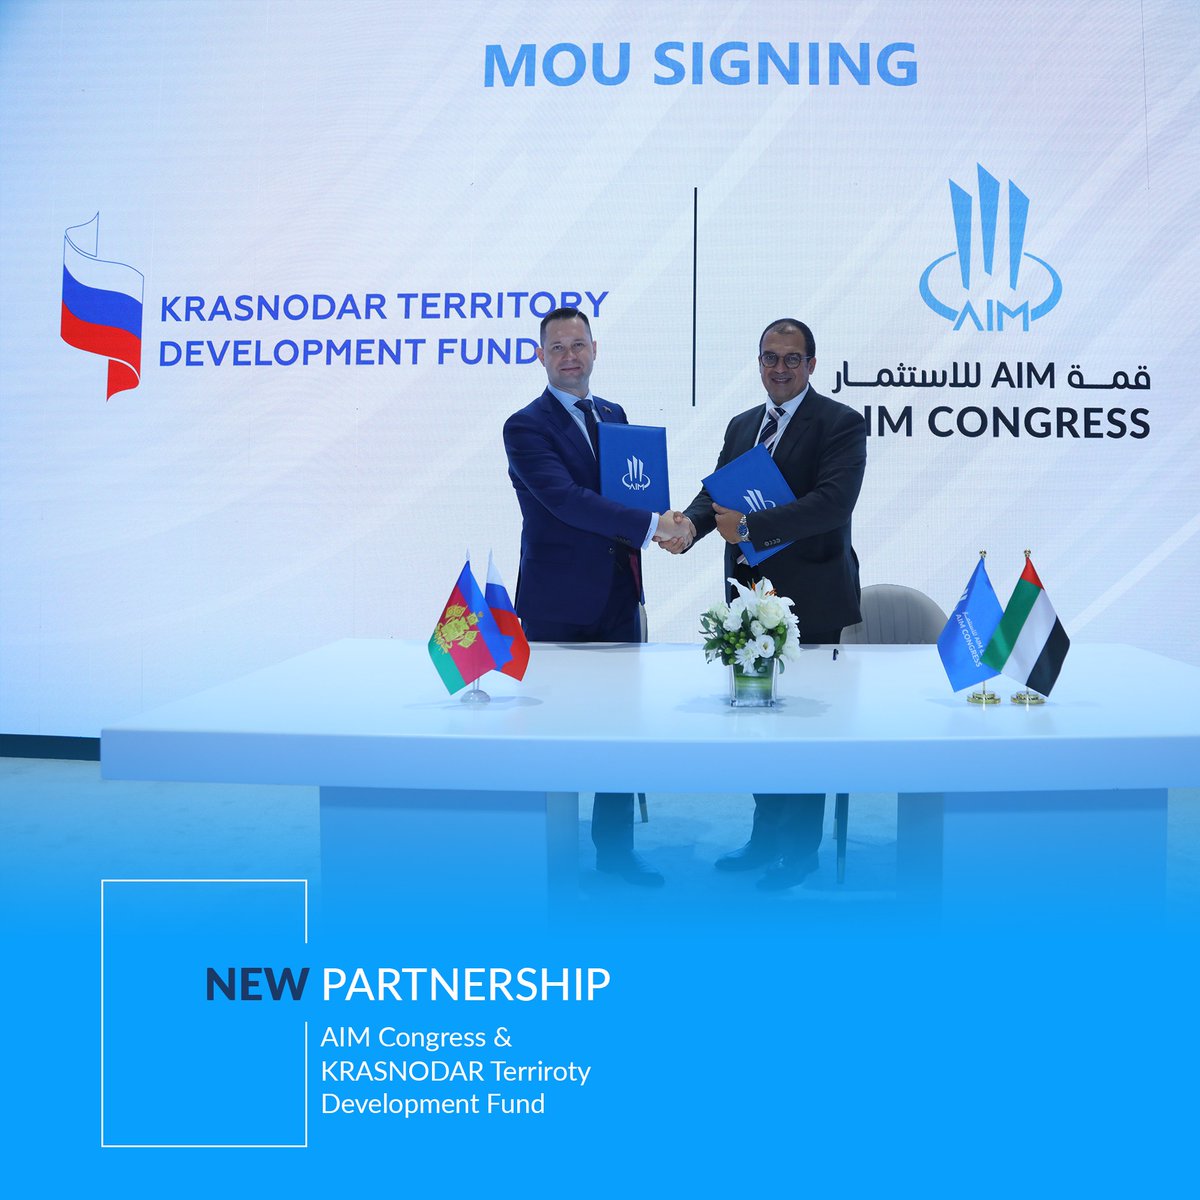 AIM is delighted to announce MOU signing with the Krasnodar Territory Development Fund
The Krasnodar Territory Development Fund,is an organization that provides financial support to industrial enterprises in the region. 

#internationalconnections #abudhabi #AIMCongress2024 #mou